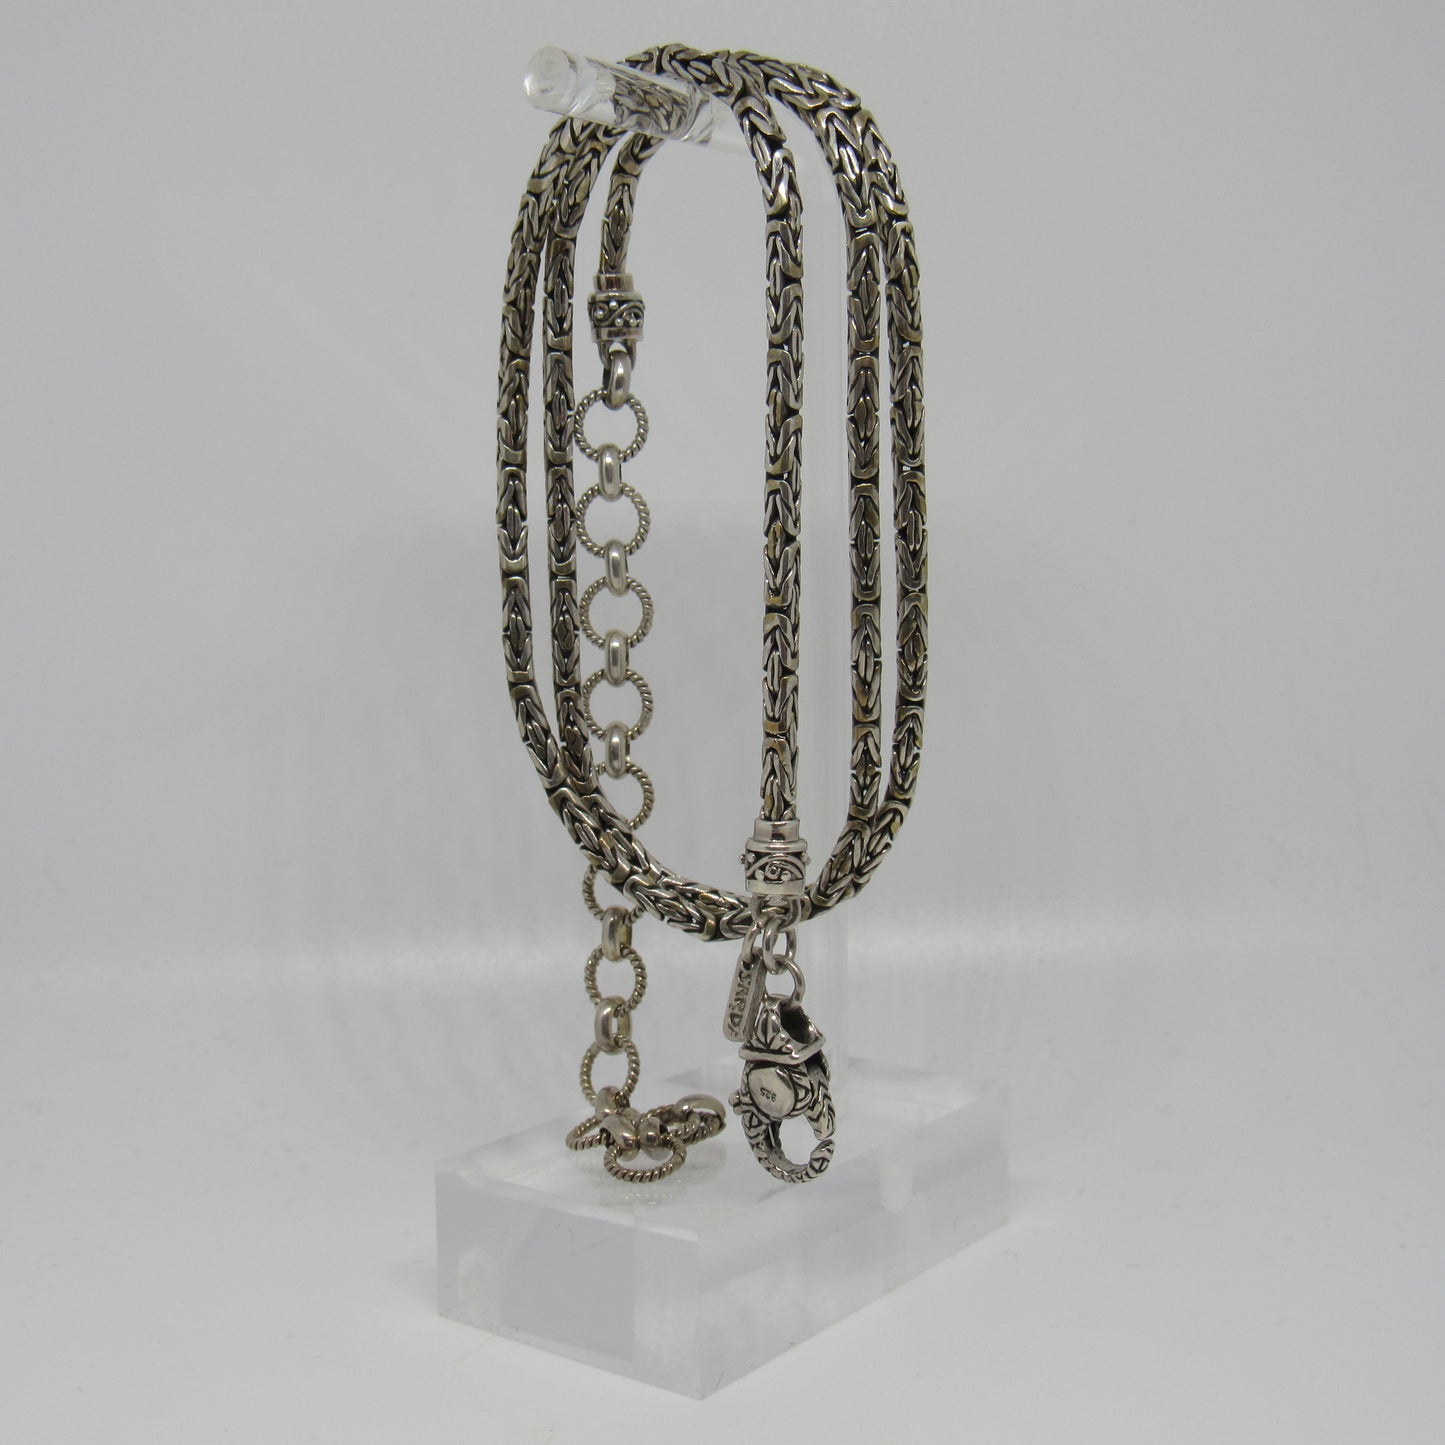 Sarda Bali Handcrafted Wheat Chain Necklace Silver 30.5 grams / 20-24" L